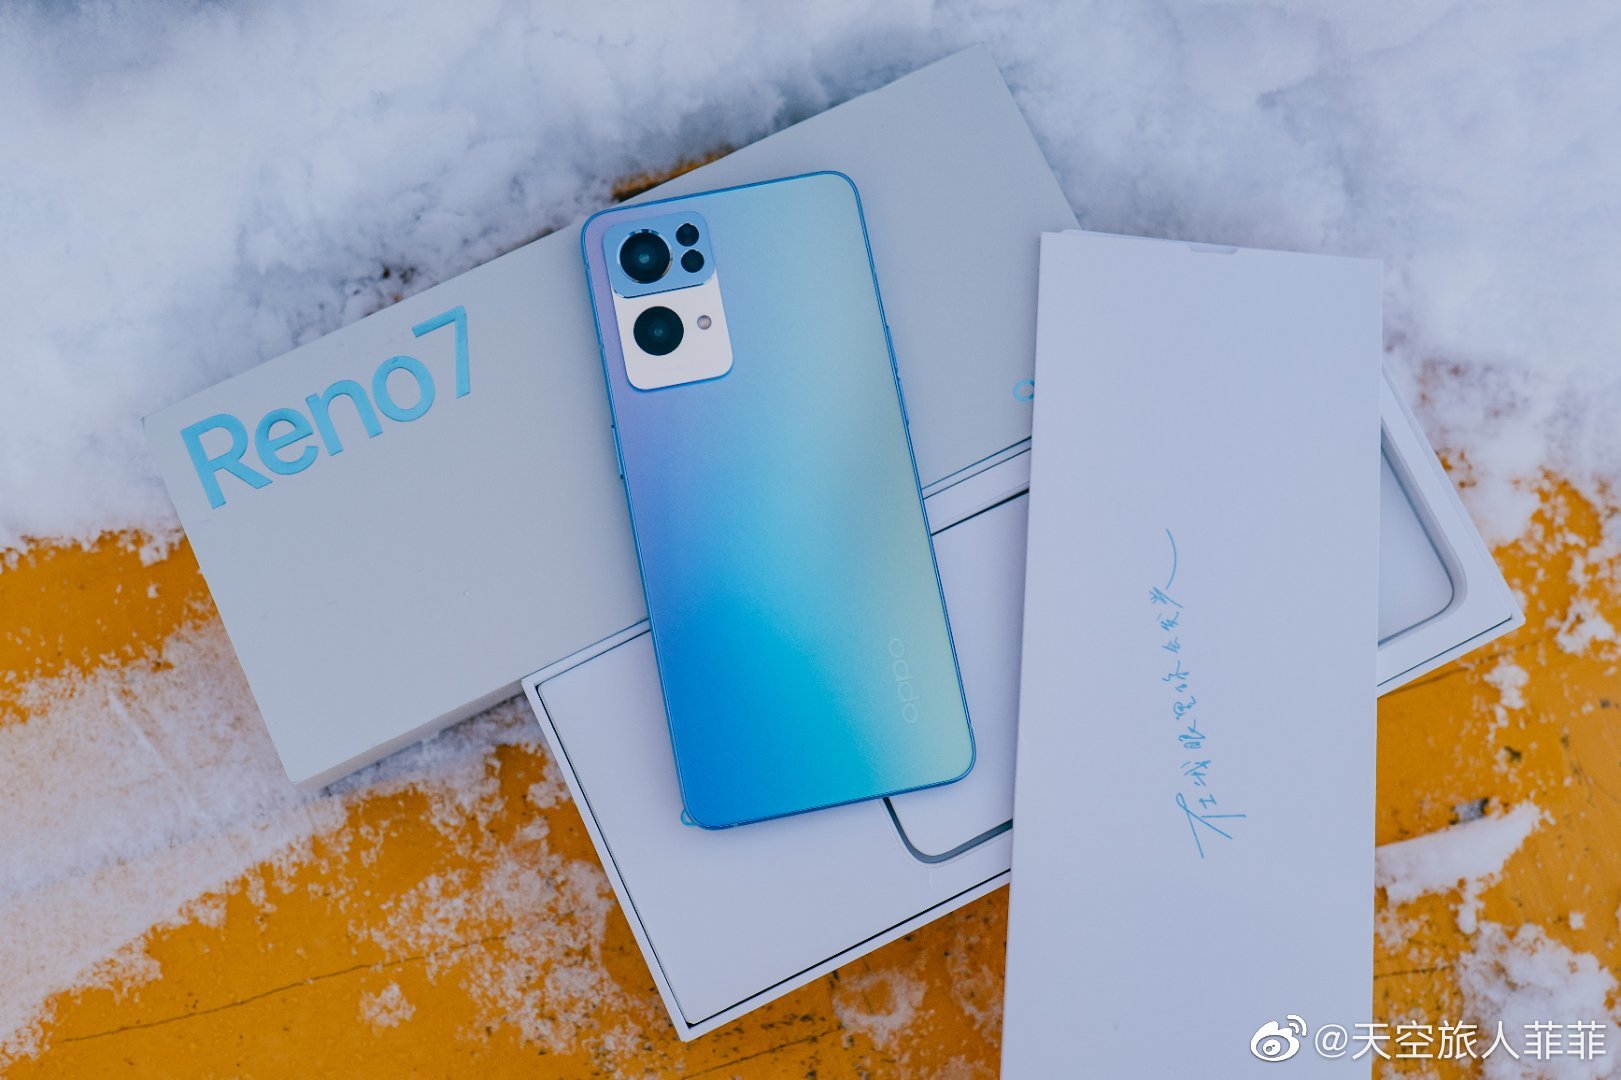 Details of OPPO Reno7 before the launch date: There are 3 versions, upgraded selfie camera with exclusive Sony sensor, priced from 9.5 million VND - Photo 3.